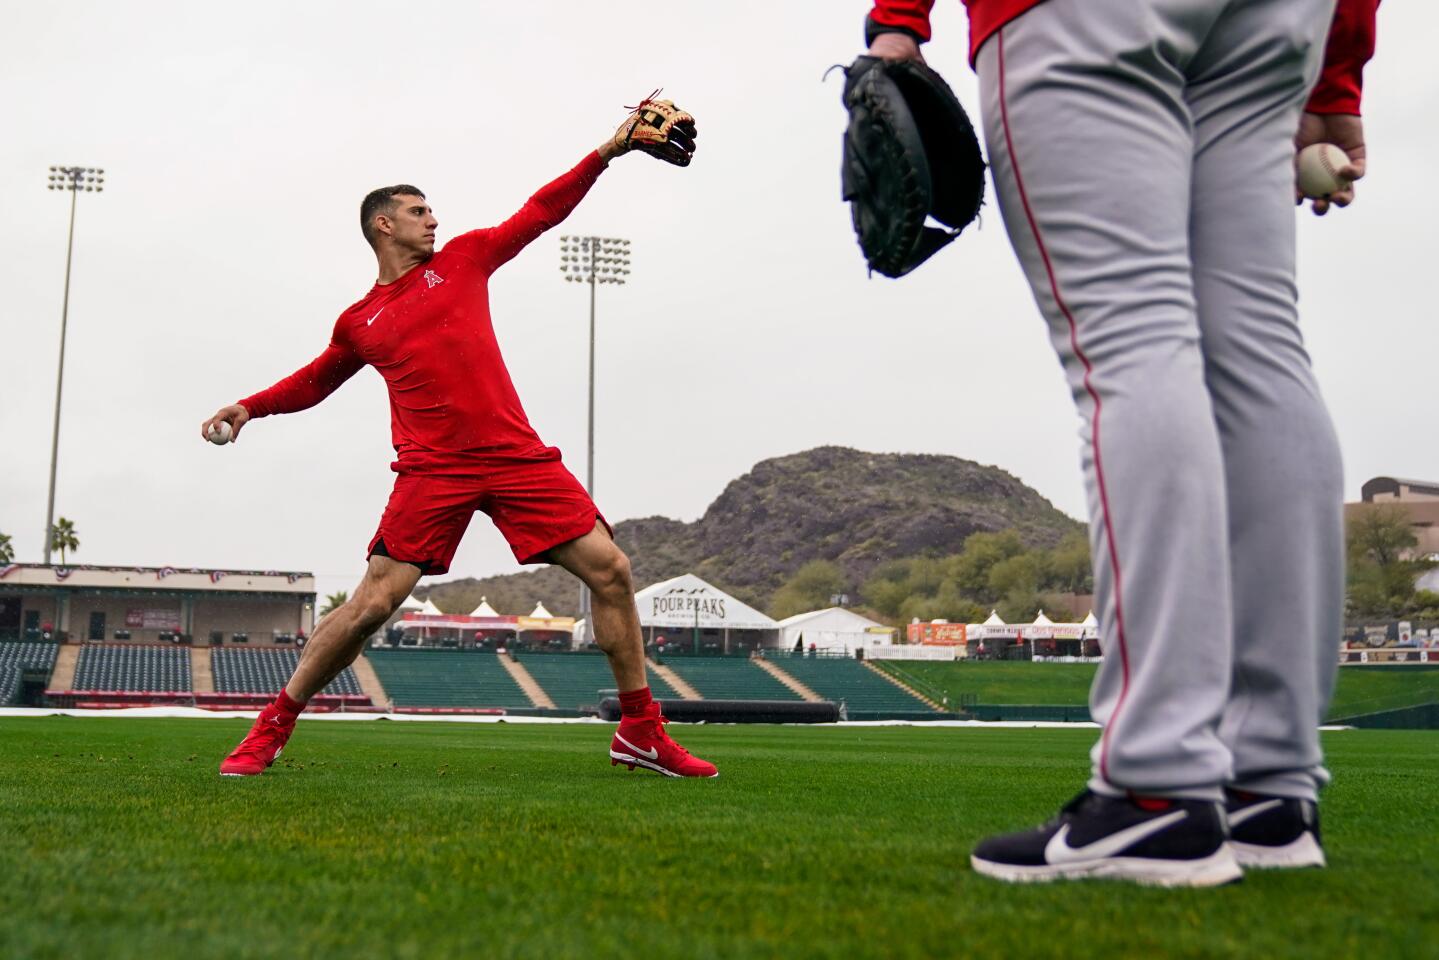 Angels pitching prospect Jacob Barnes works out during a spring training practice in Tempe.